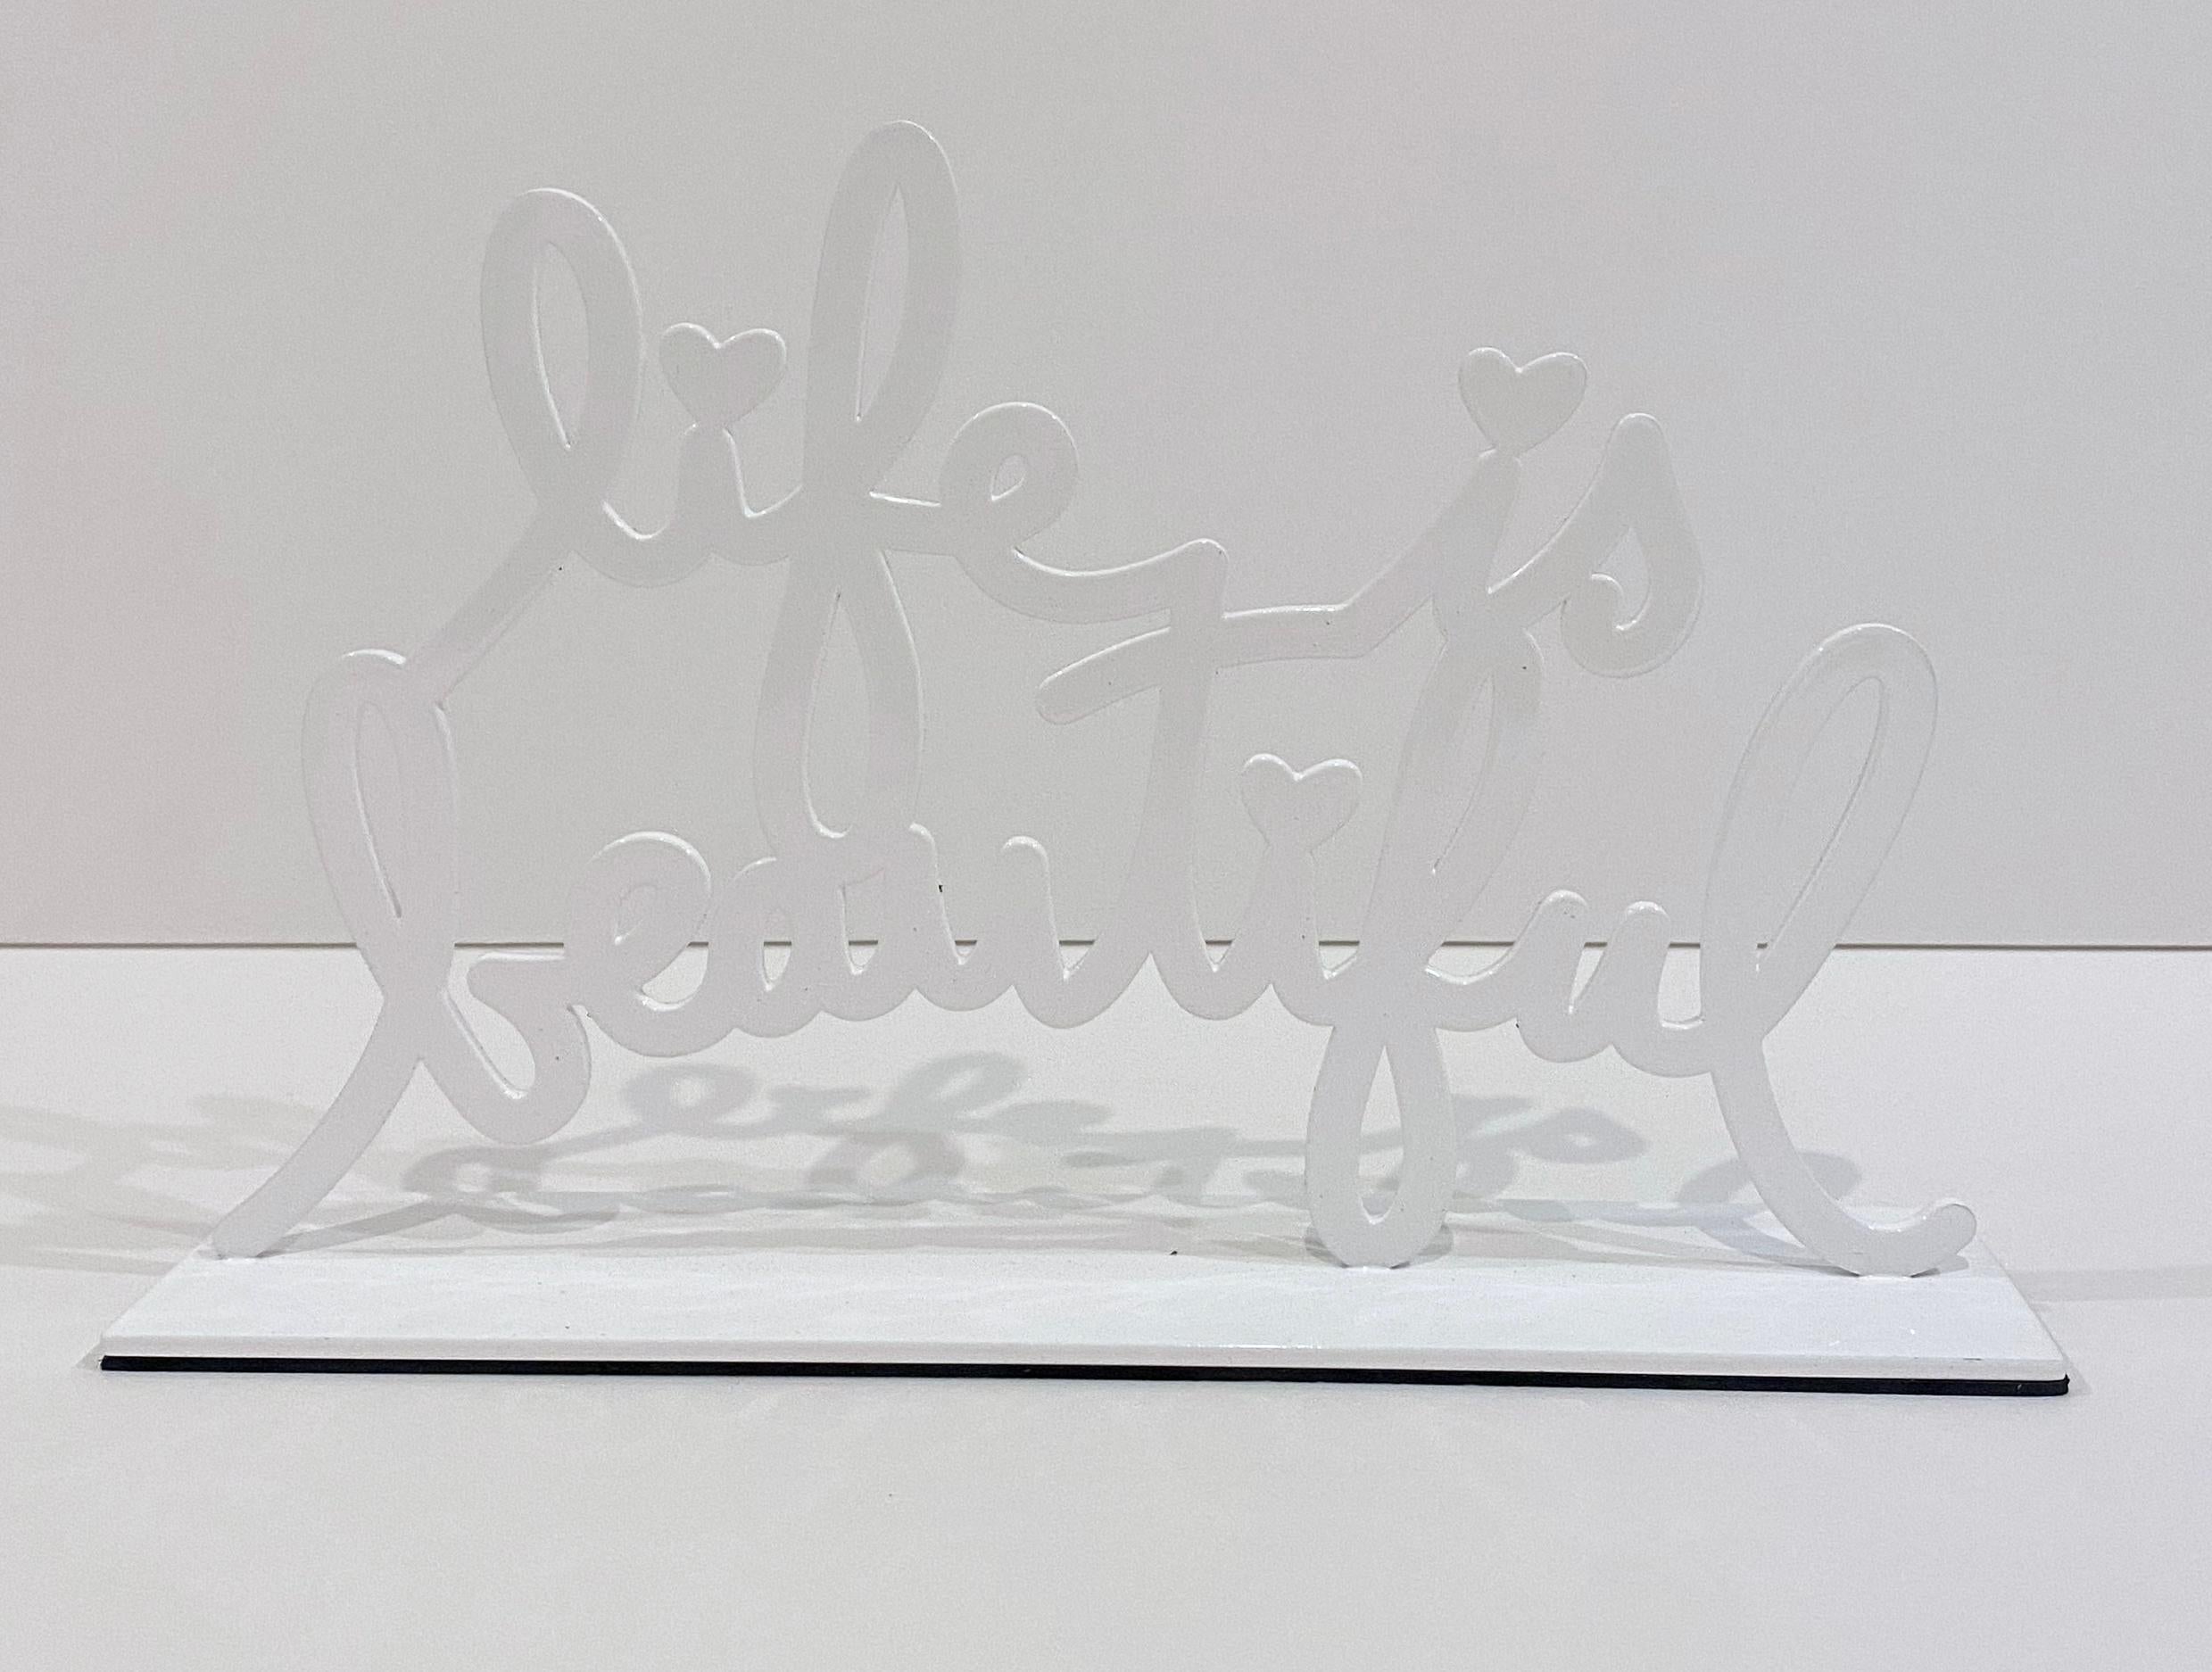 Mr. Brainwash Life is Beautiful Sculpture (White)
Artist: Mr. Brainwash
Medium: Coated metal sculpture
Title: Life is Beautiful (White)
Year: 2022
Edition: 18/50
Image Size: 7" x 10 1/2" x 2 1/2"
Signed: Hand signed, numbered, and dated in silver ink